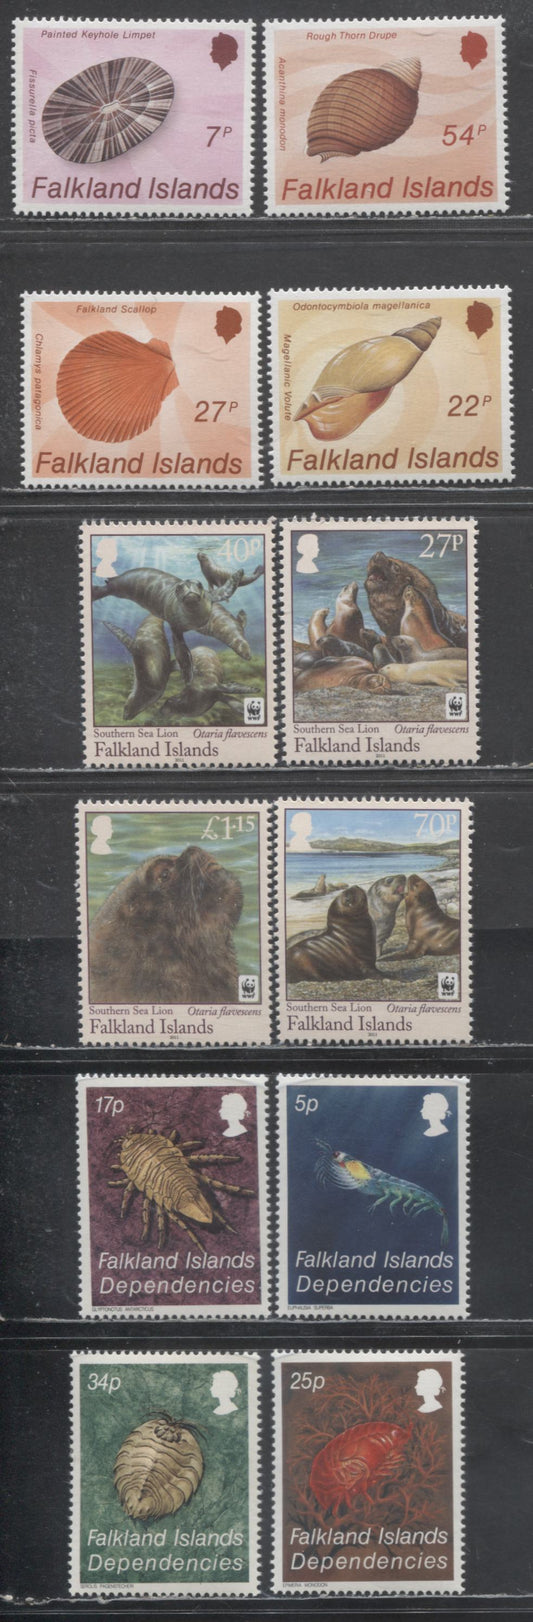 Lot 203 Falkland Islands SC#437-440,1030-1033, IL76-IL79  1986 Shells - 2011 Southern Sea Lions Issues, 12 VFNH Singles, Click on Listing to See ALL Pictures, 2017 Scott Cat. $20.5 USD